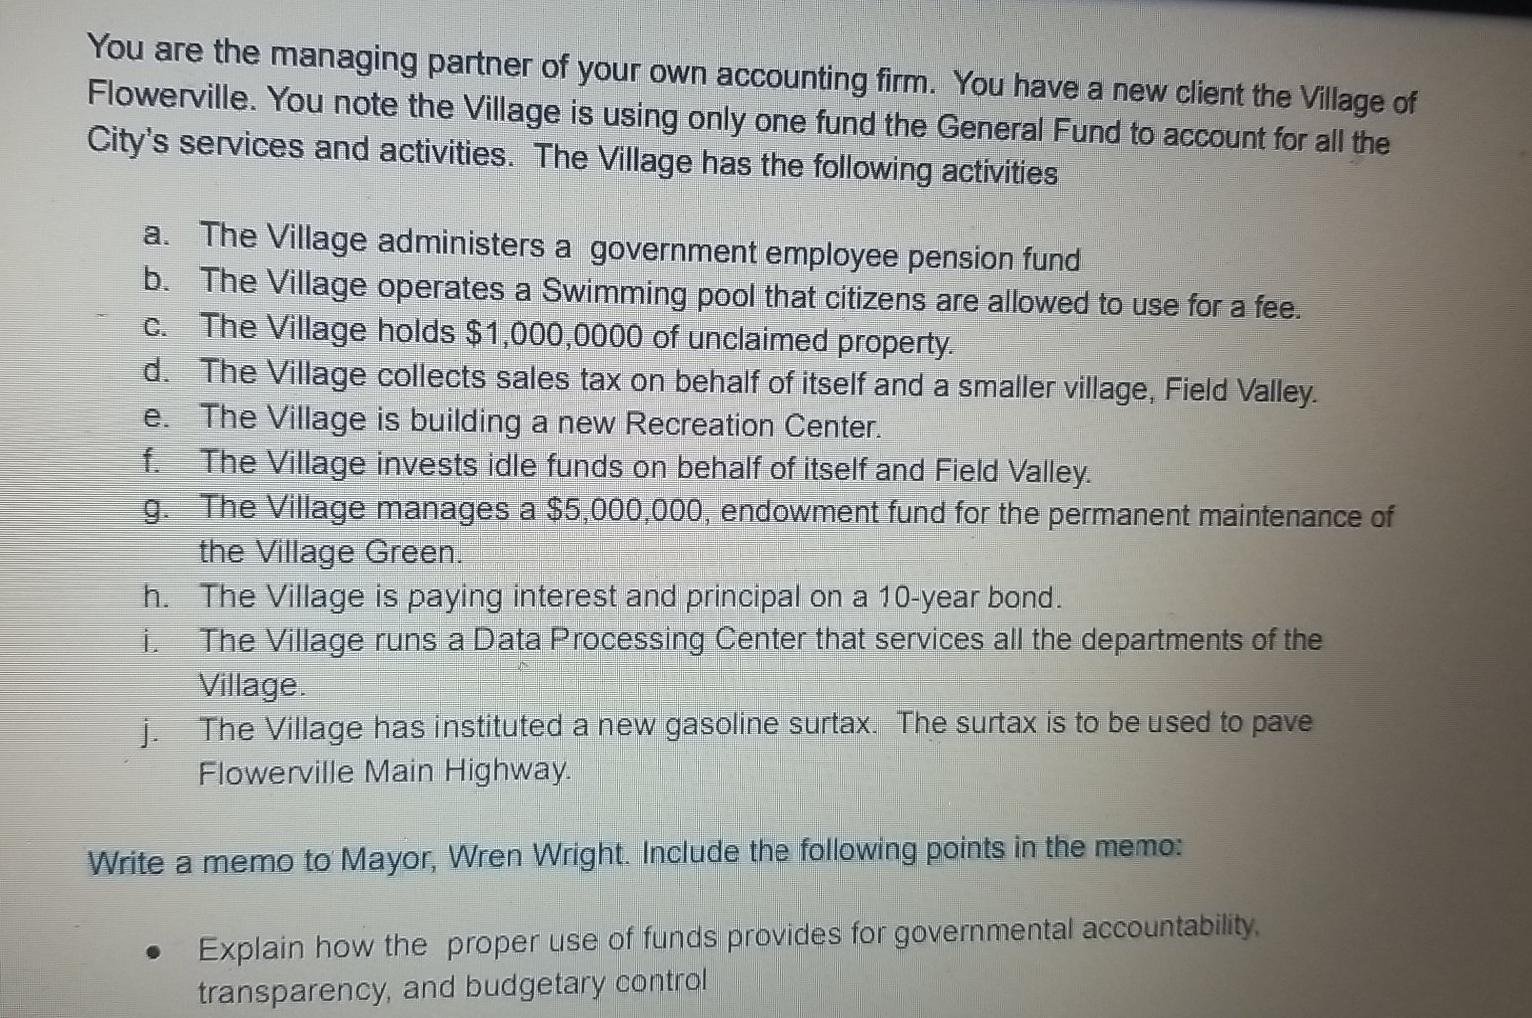 You are the managing partner of your own accounting firm. You have a new client the Village of Flowerville. You note the Vill